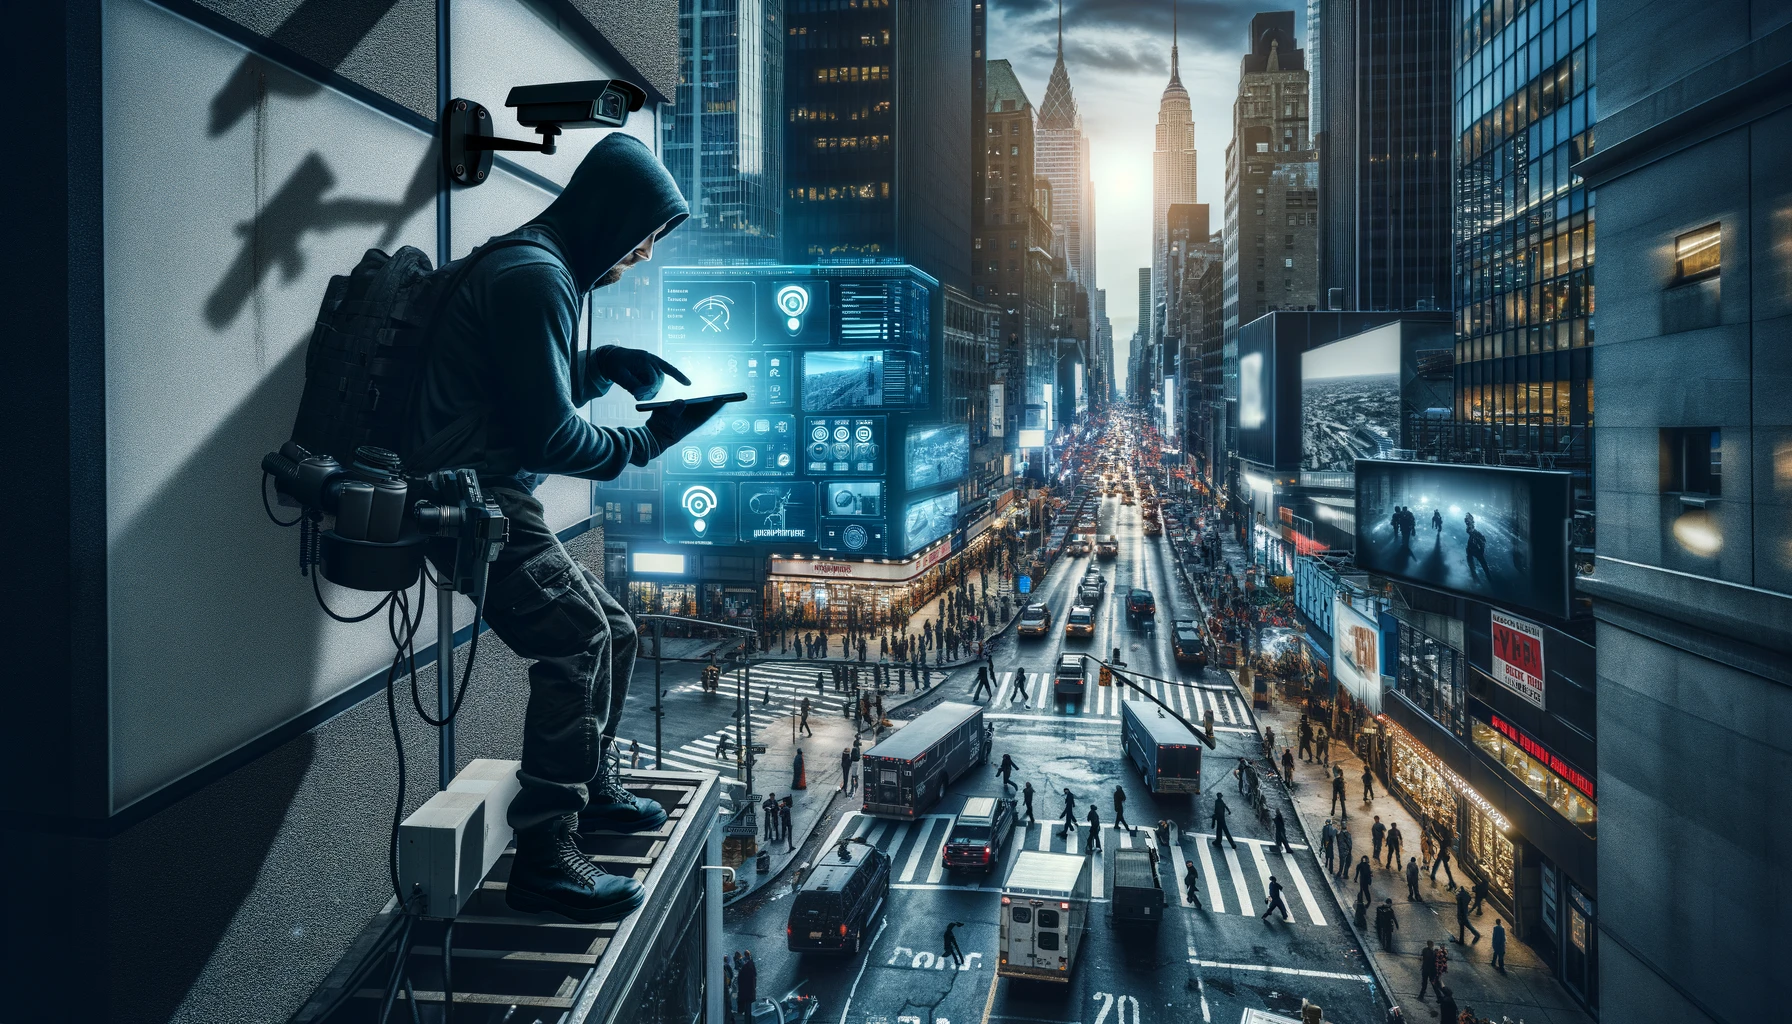 Urban prepper using surveillance technology and vigilance to assess risks in a bustling city, emphasizing situational awareness and security preparedness